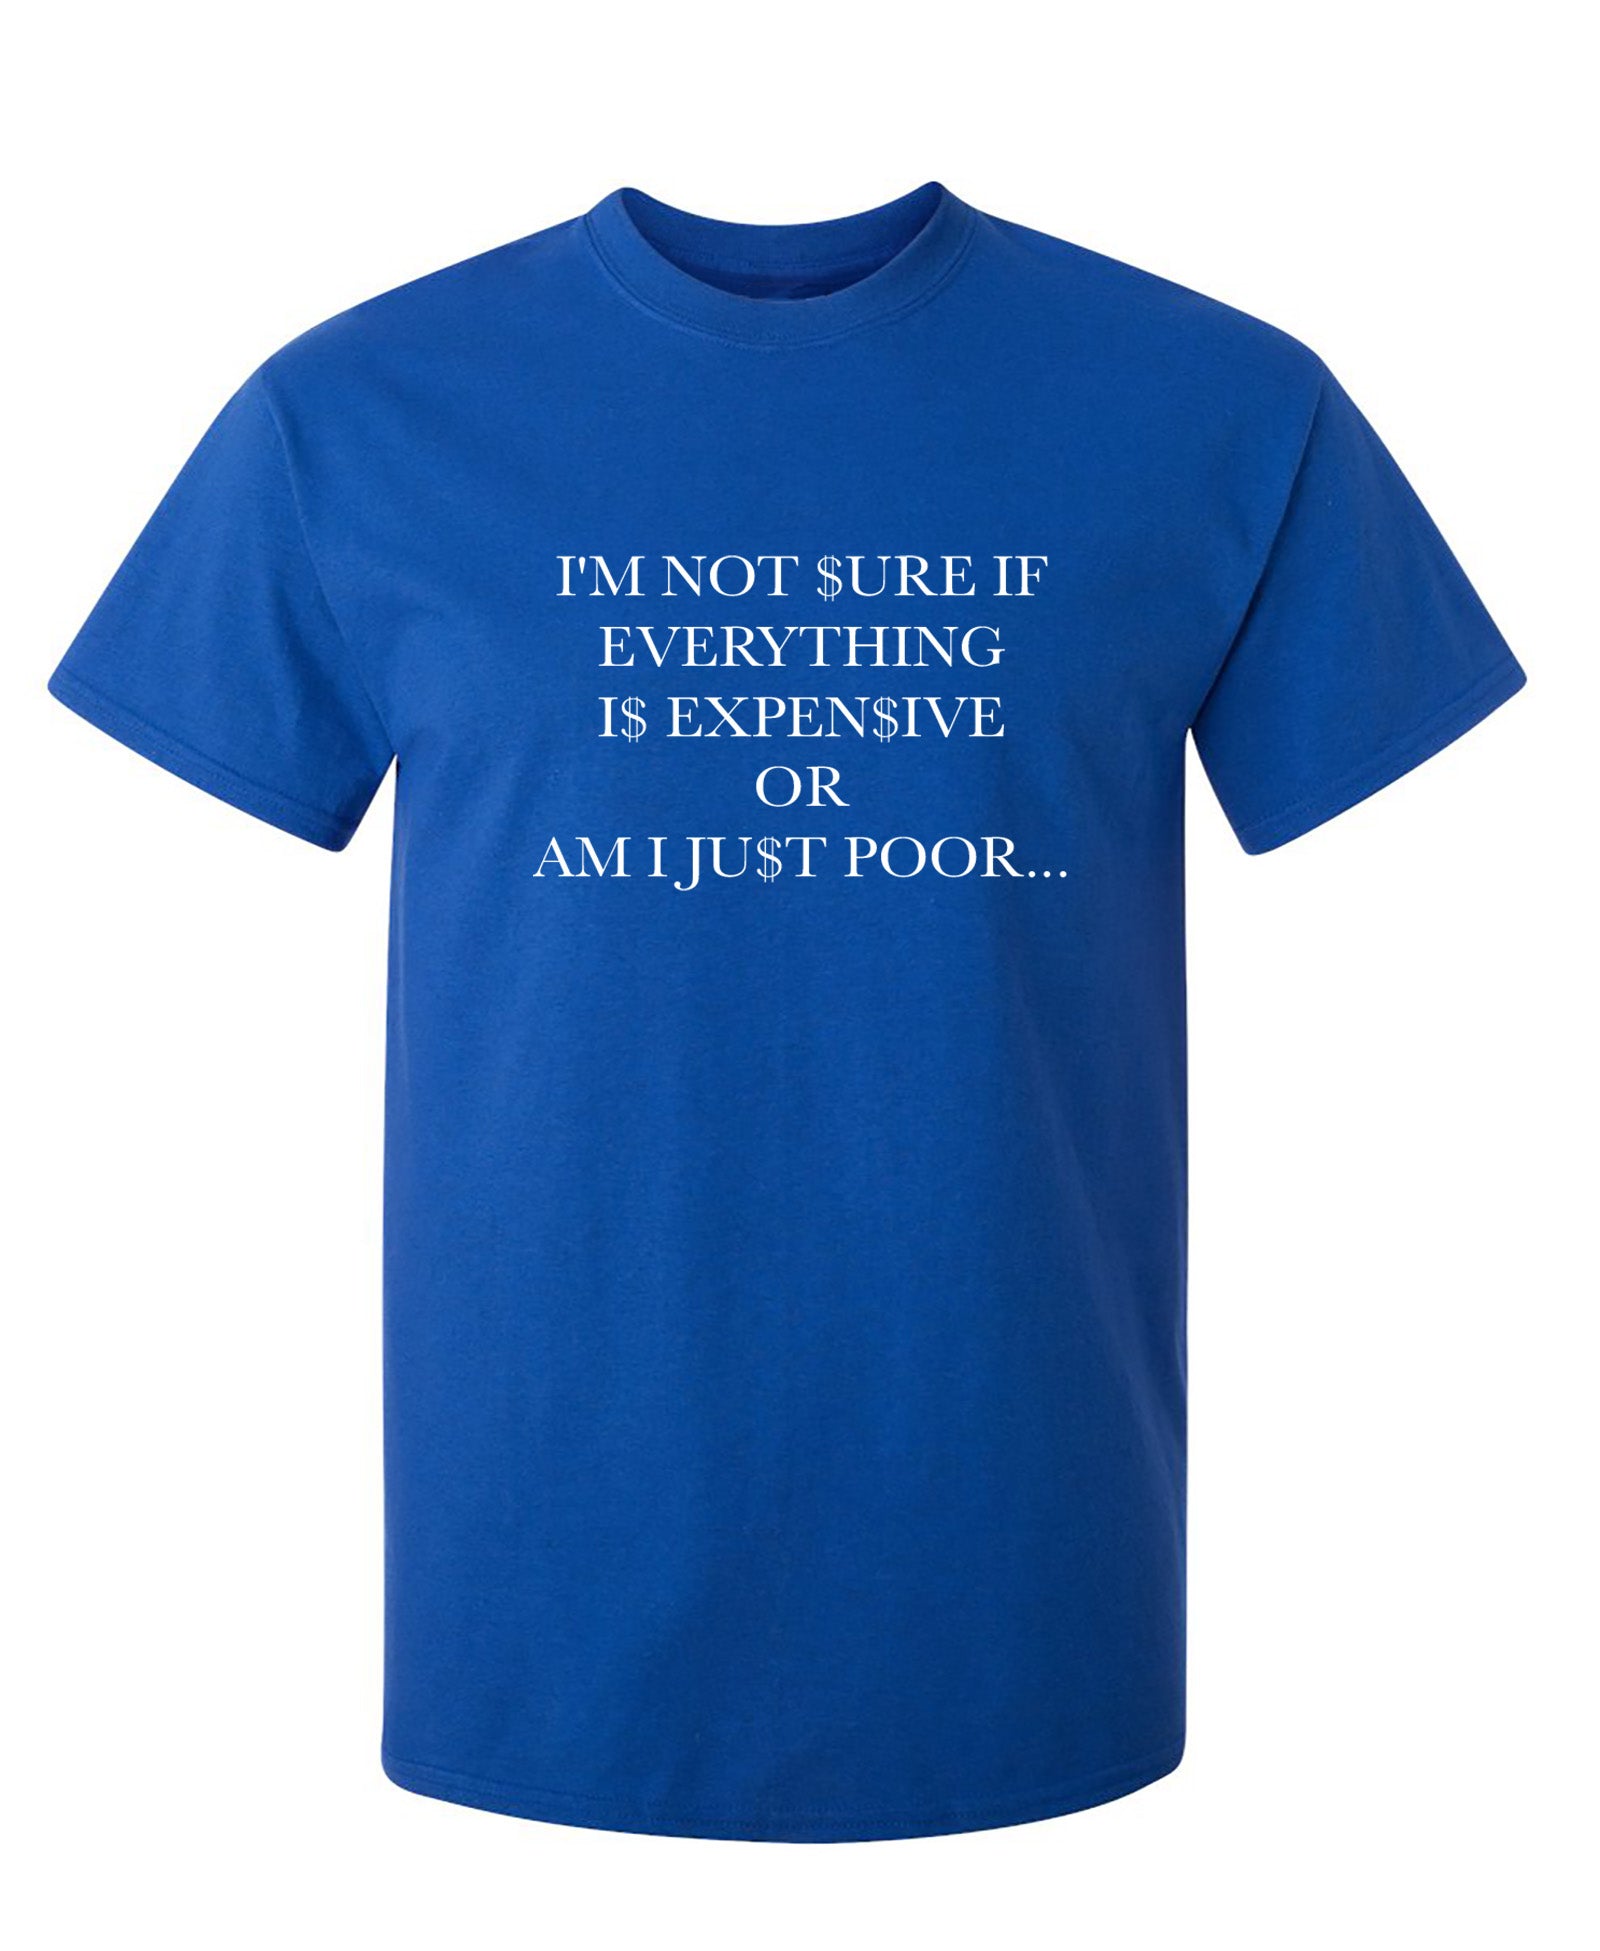 I'm Not Sure If Everything Is Expensive - Funny T Shirts & Graphic Tees